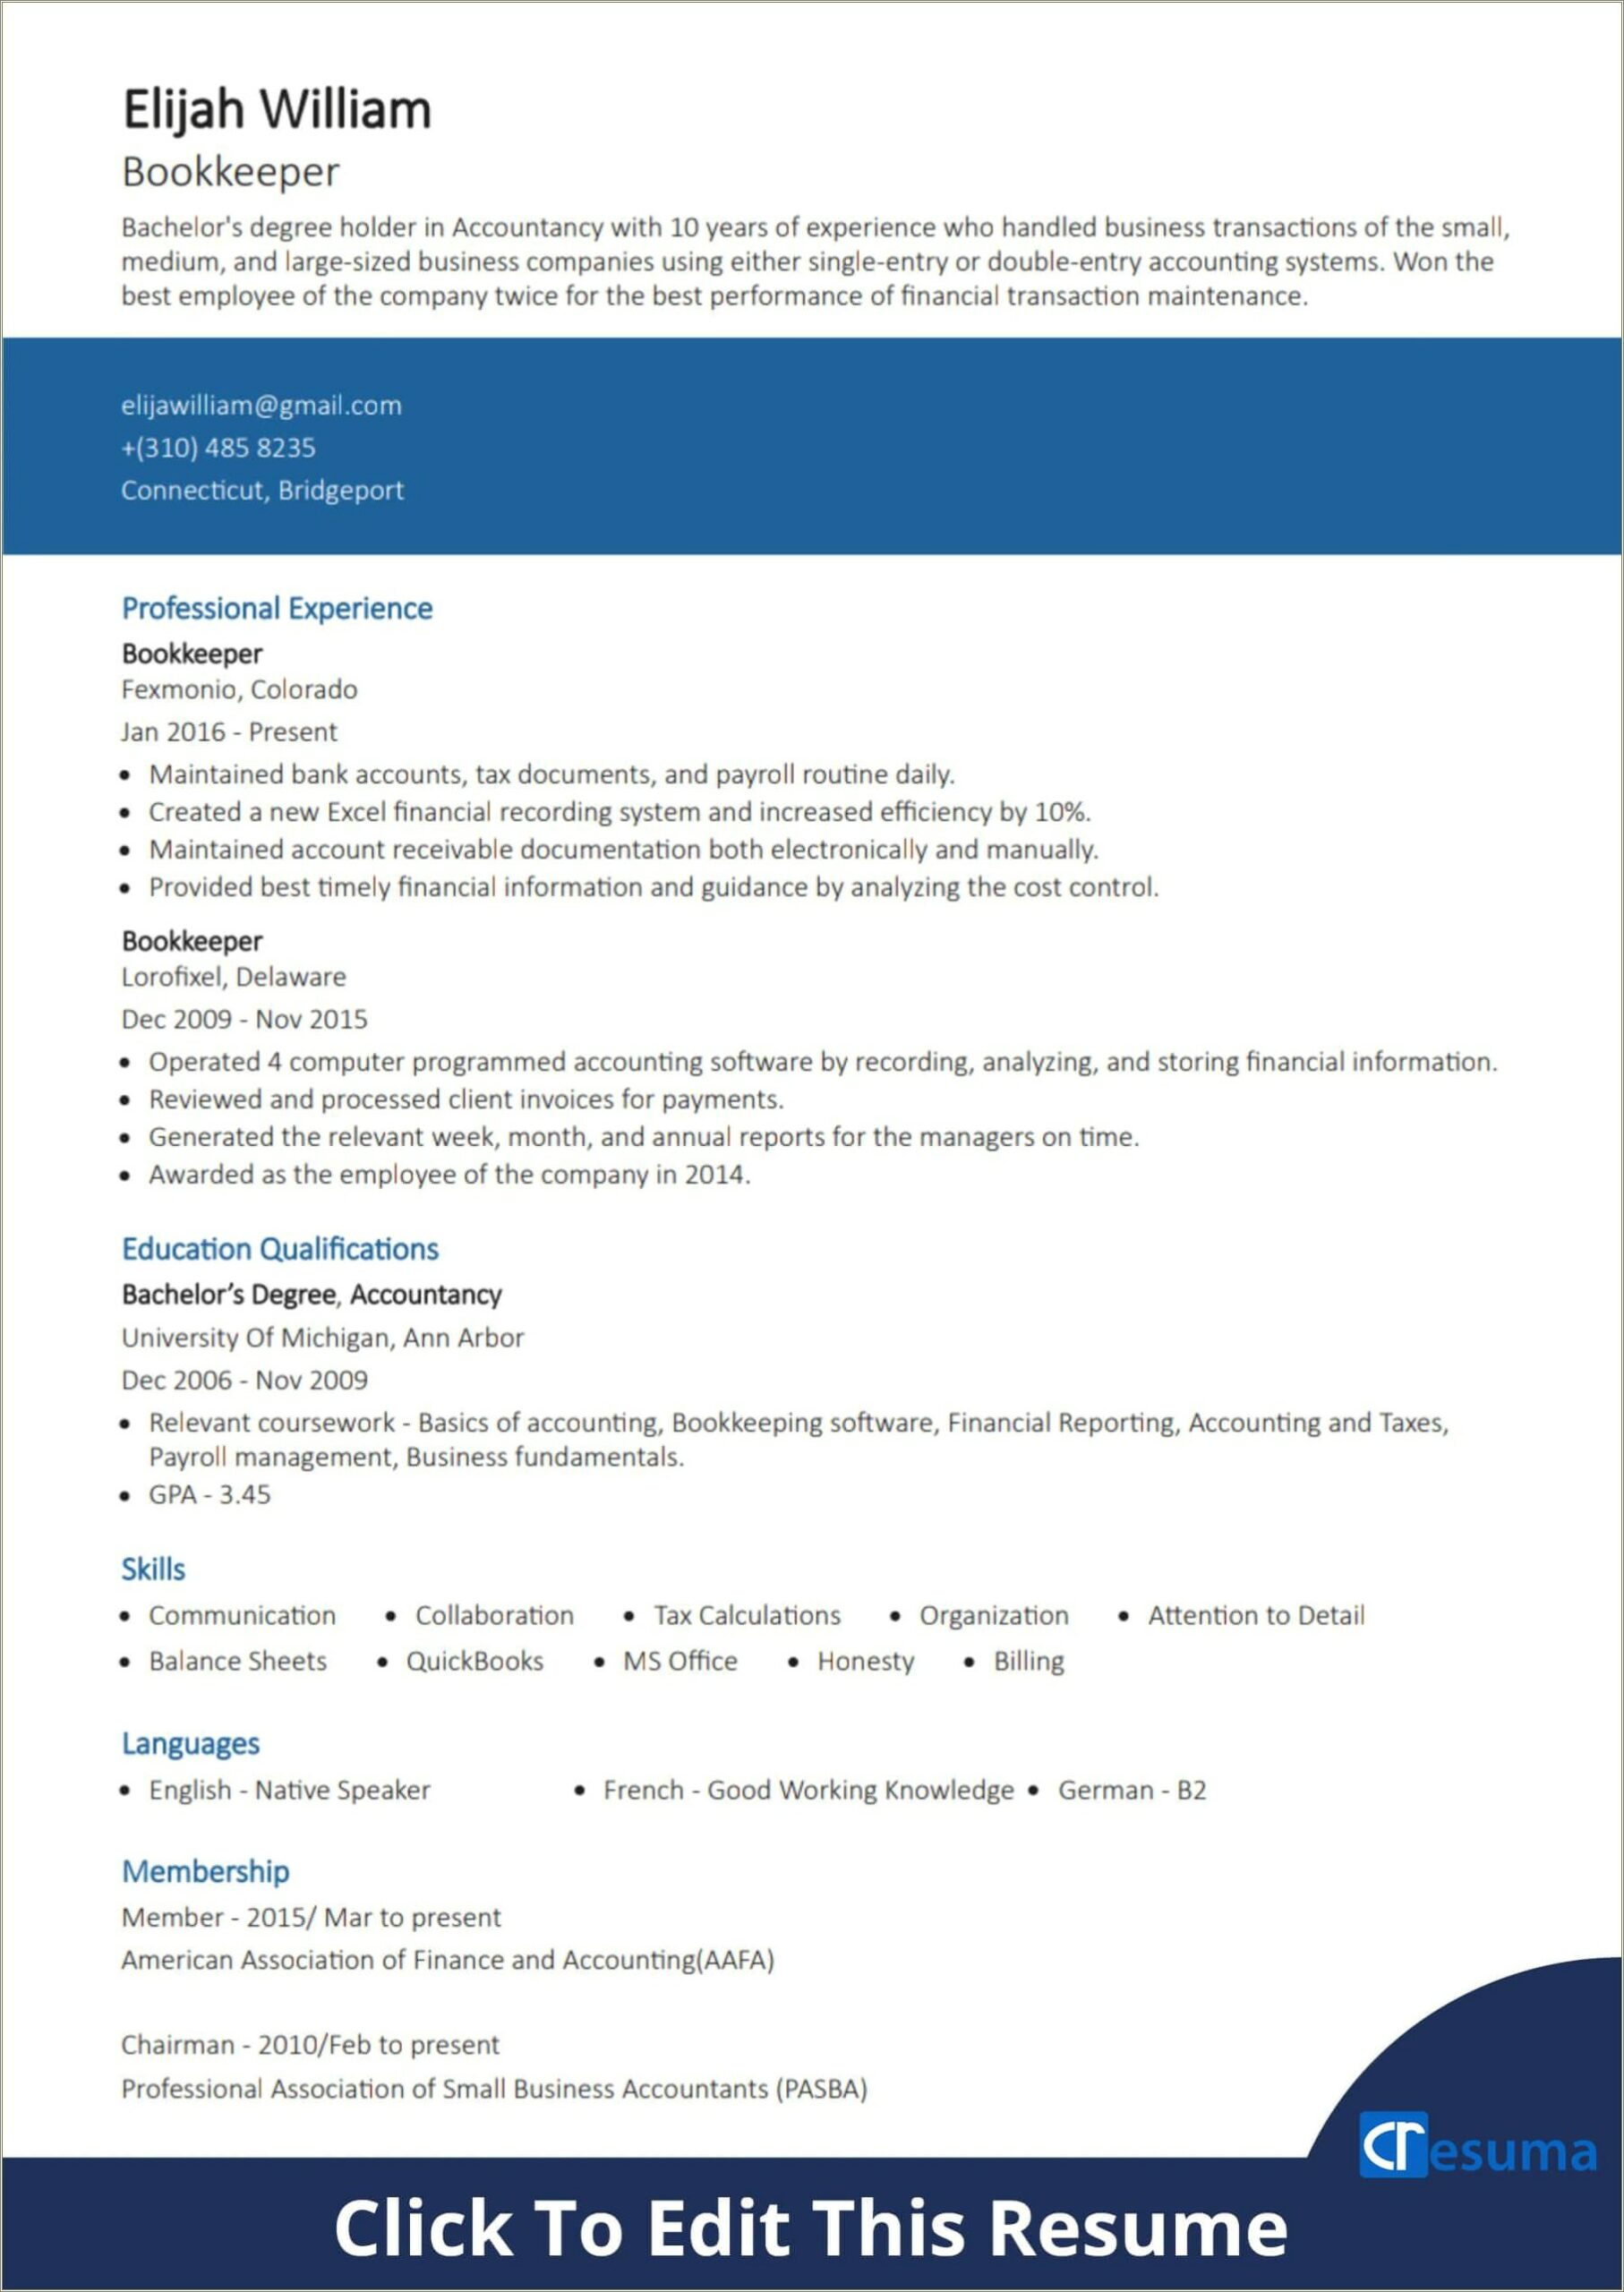 Resume Example For Small Business Application